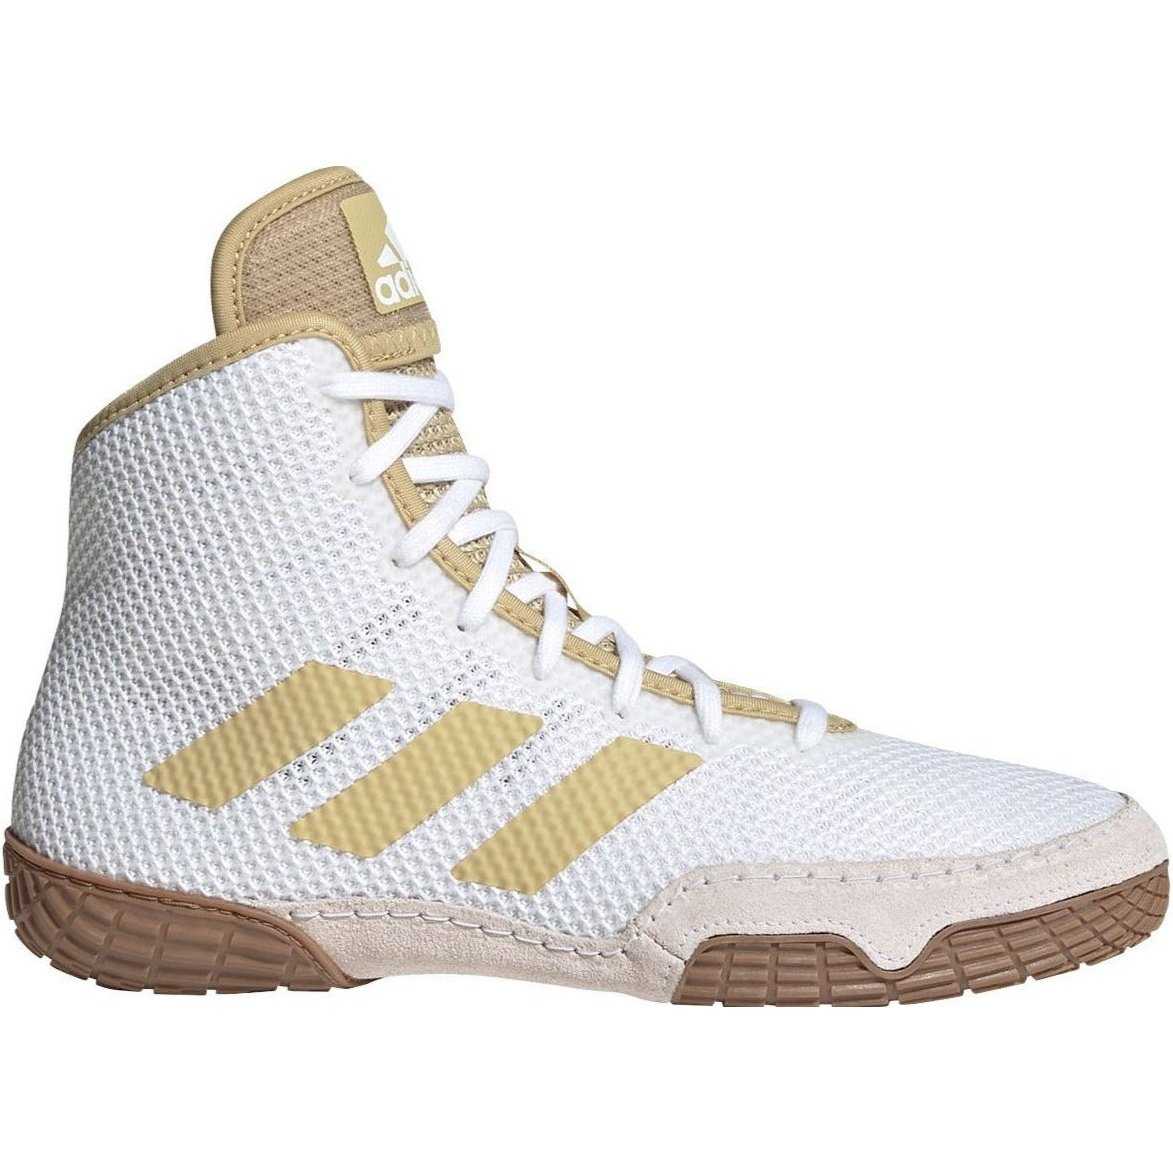 Adidas 231 Tech Fall 2.0 Youth Wrestling Shoes - White Vegas Gold